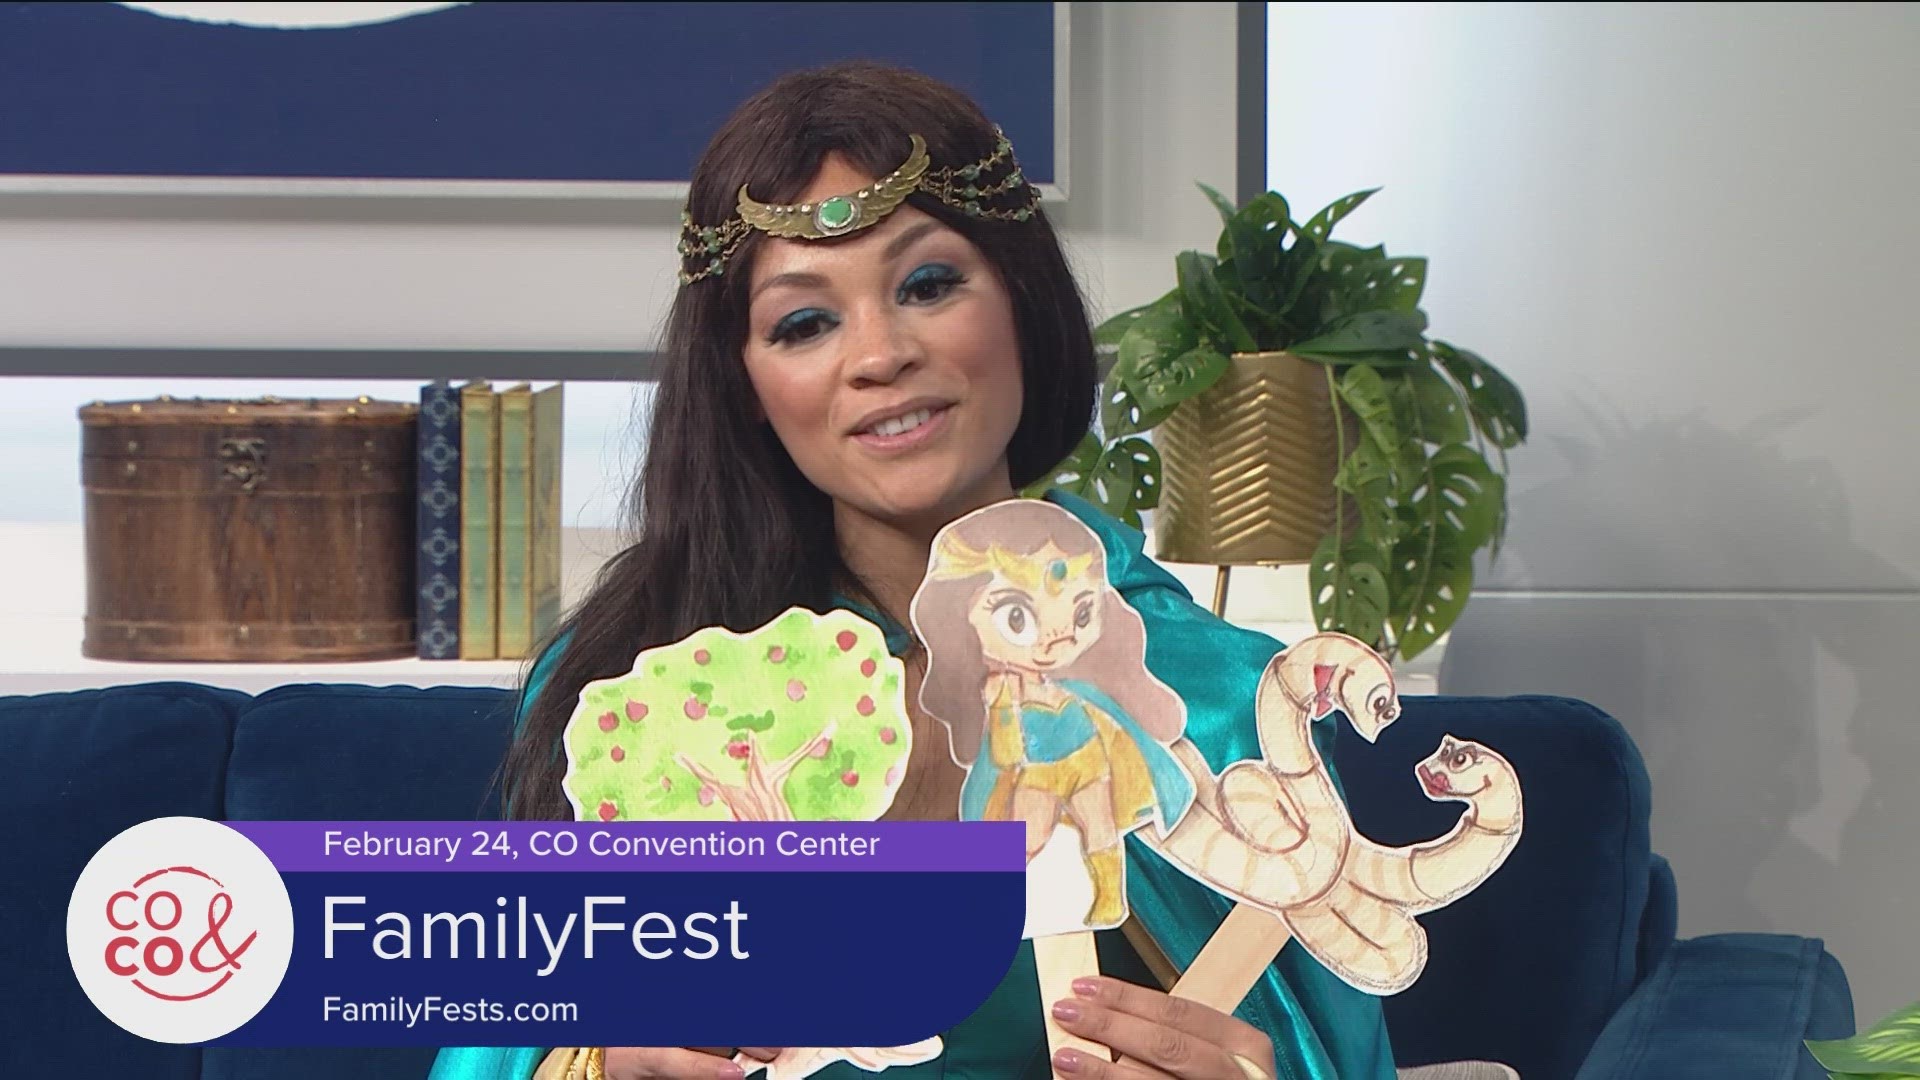 Family Fest takes place on February 24th at the Colorado Convention Center. Learn more and get tickets at FamilyFests.com.